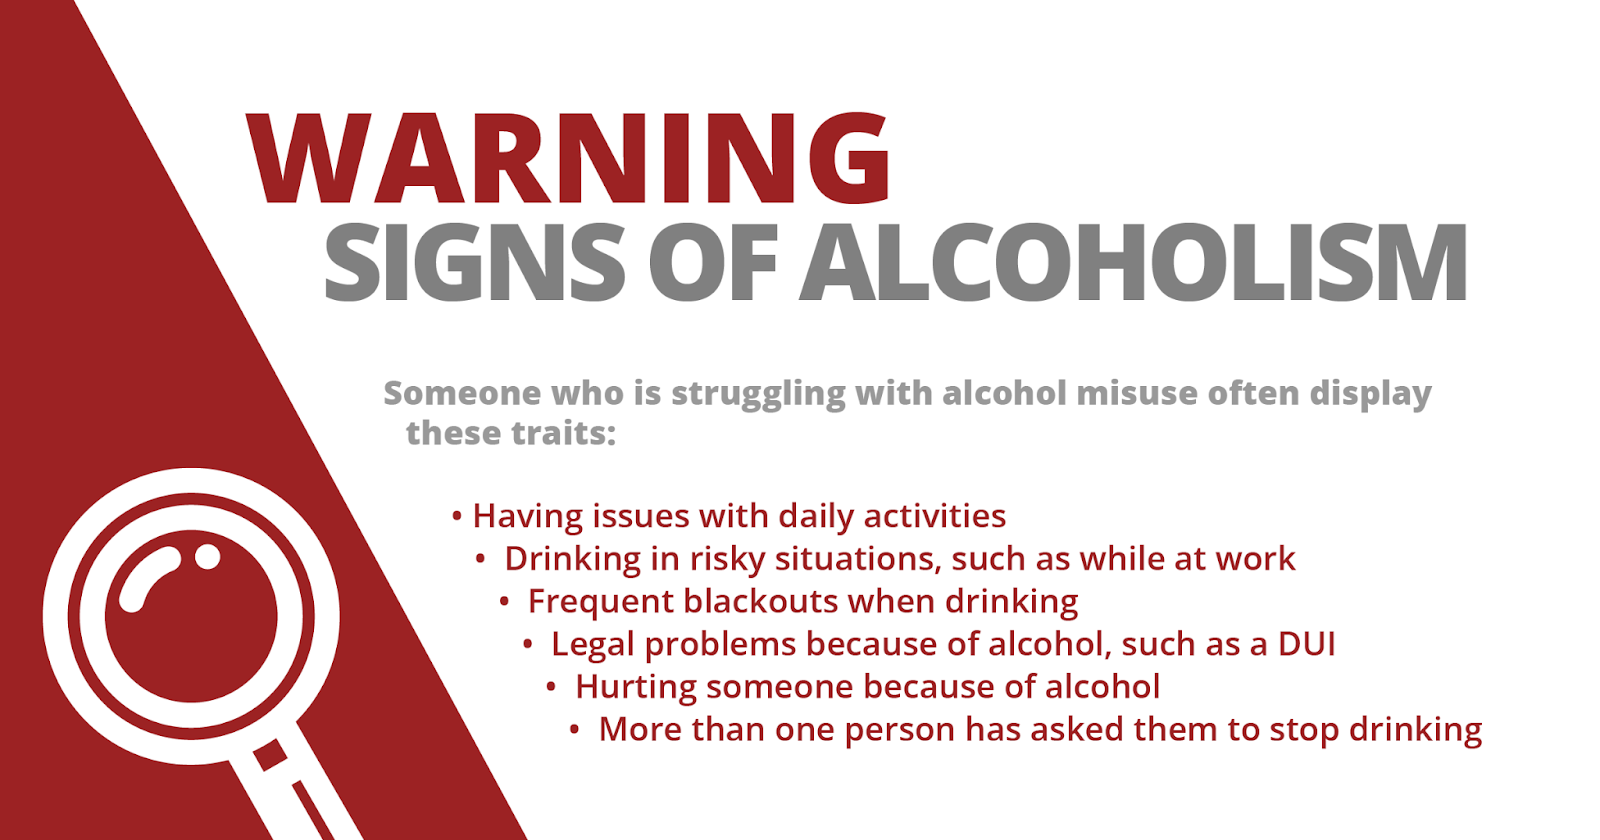 Warning signs of alcoholism